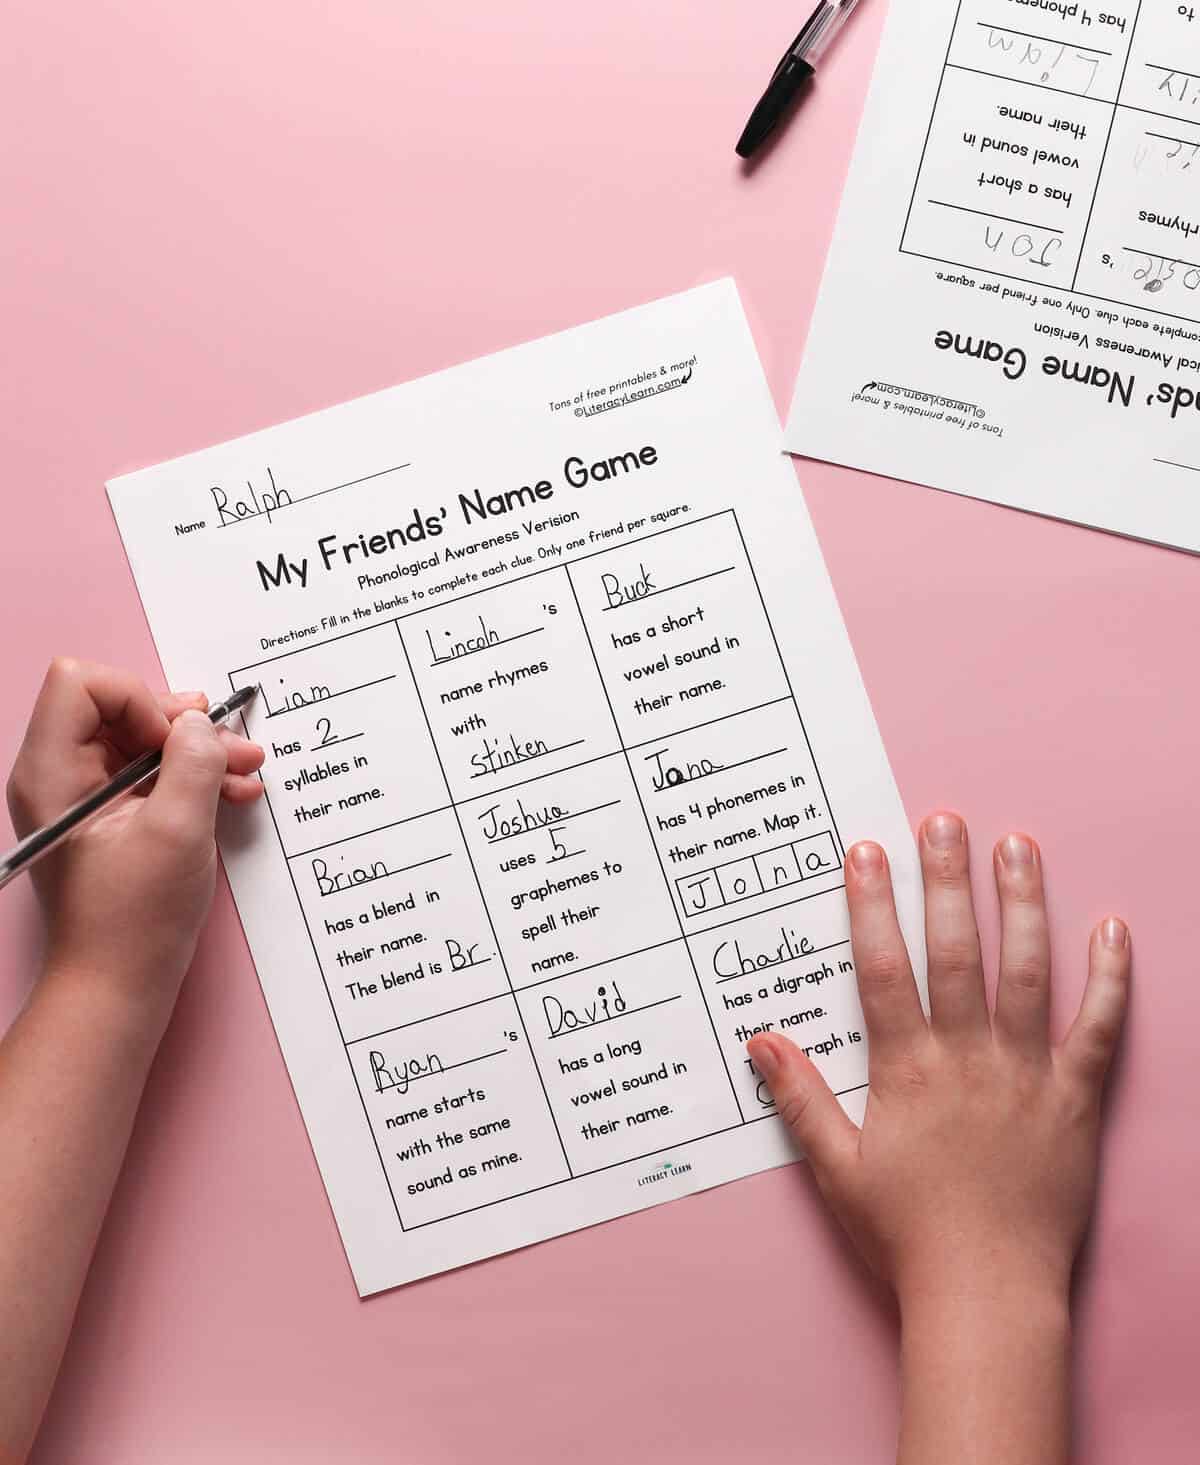 A child's hands holding a pen, filling out the Phonological Awareness Name Game worksheet.